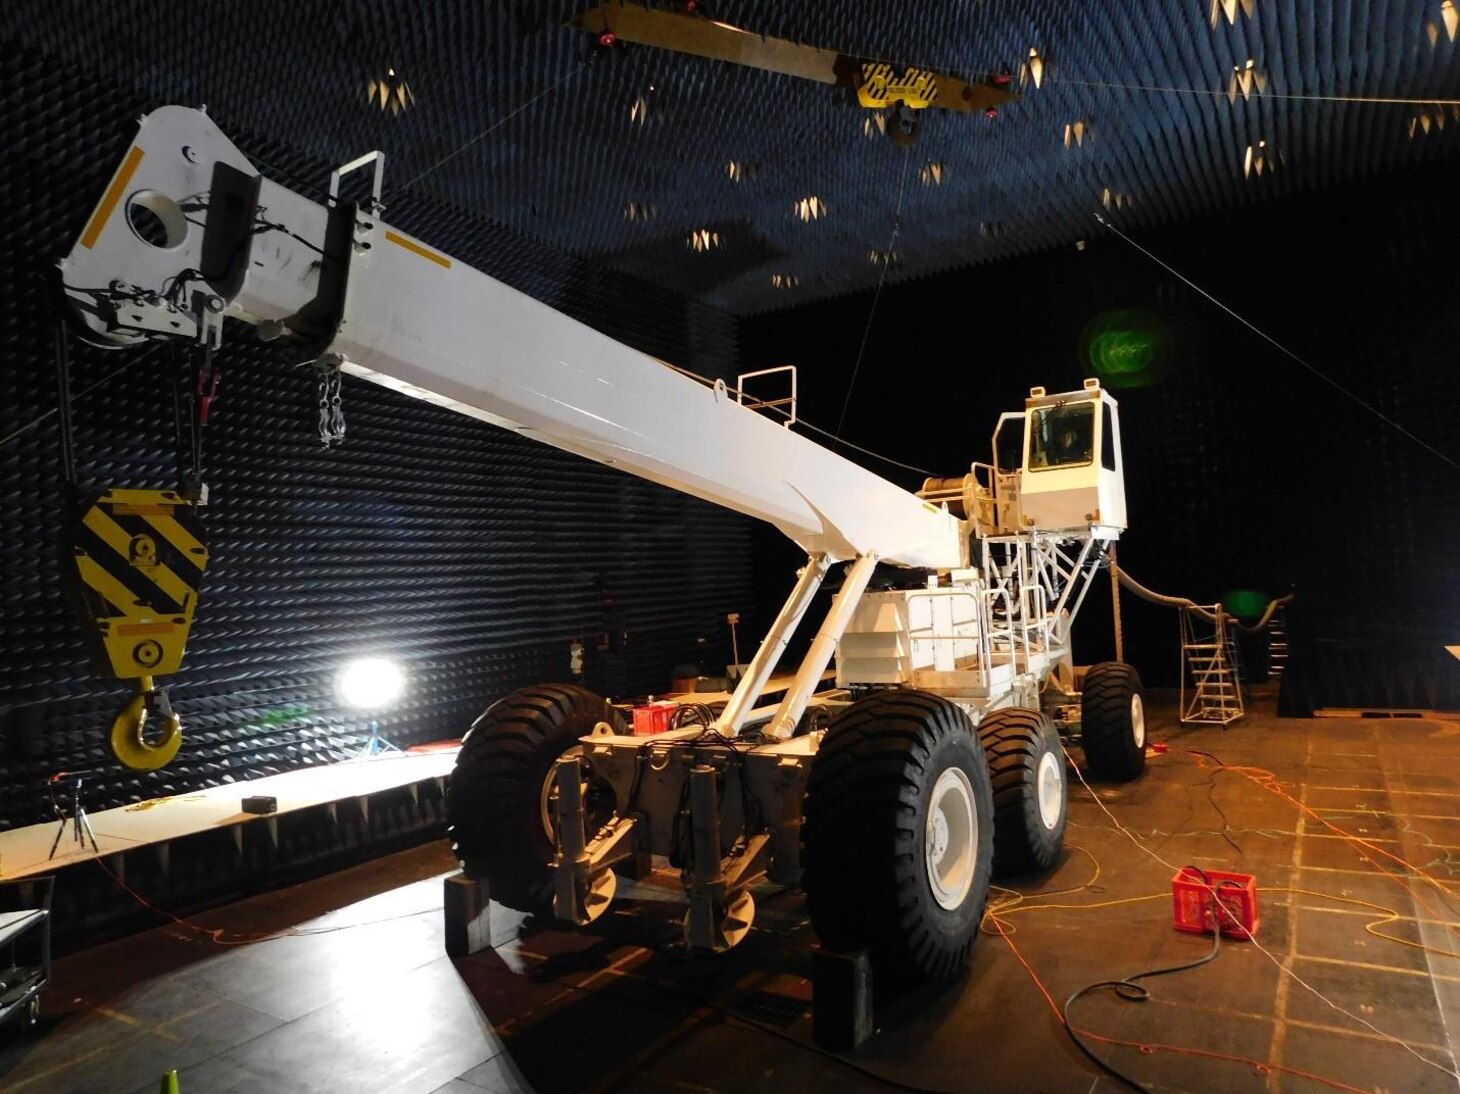 The Navy’s Common Aviation Support Equipment program office is currently evaluating Electromagnetic Environmental Effects (E3) on a Crash and Salvage Crane (CSC) at the Aircraft Anechoic Test Facility in Patuxent River, Maryland.